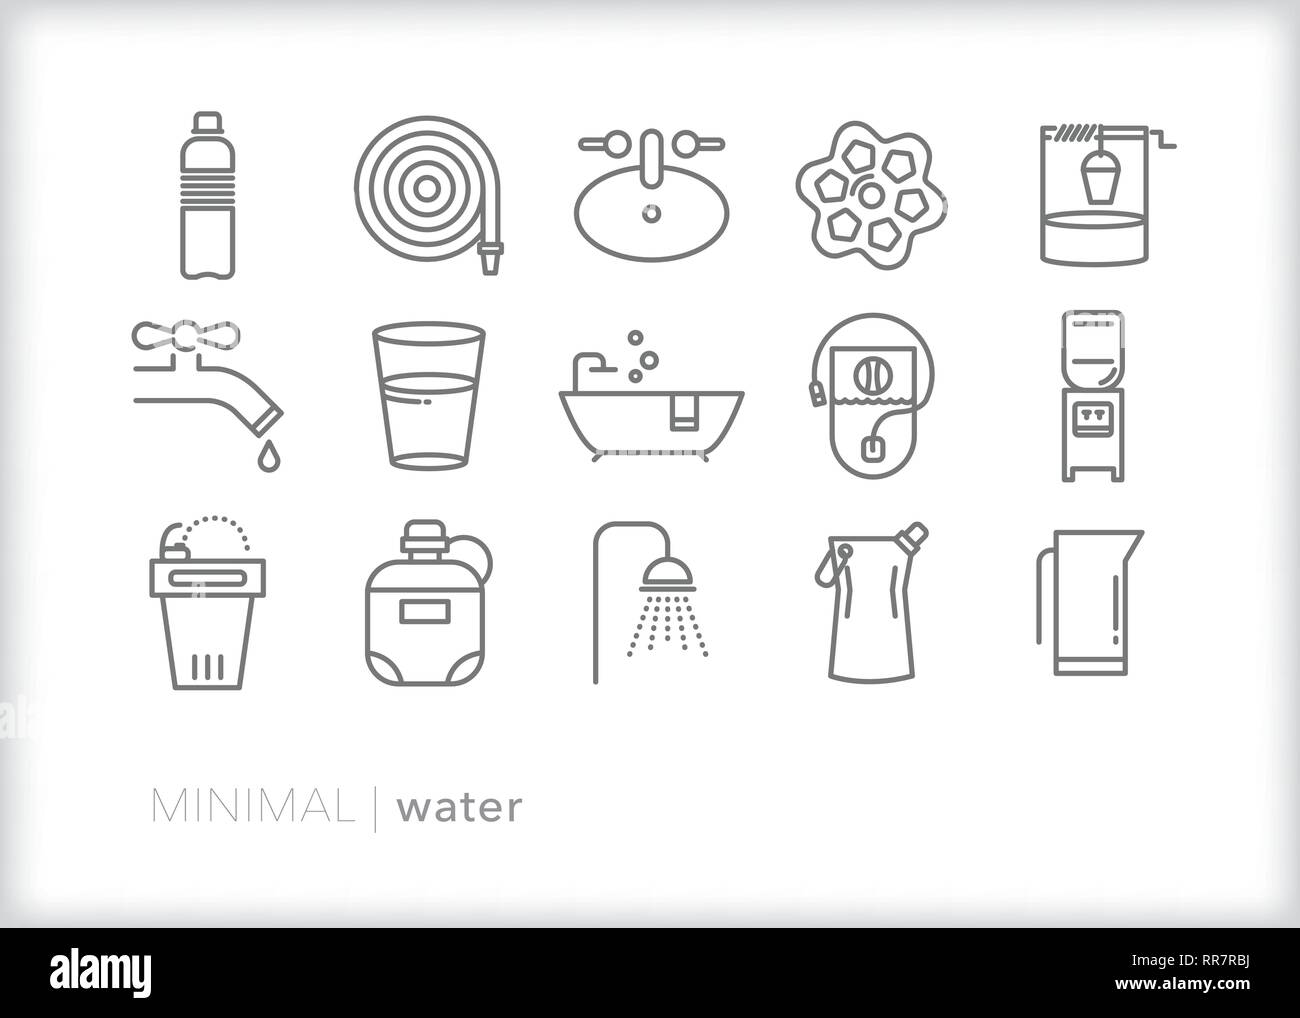 Set of 15 water line icons including ways to access, clean, store and retrieve water Stock Vector